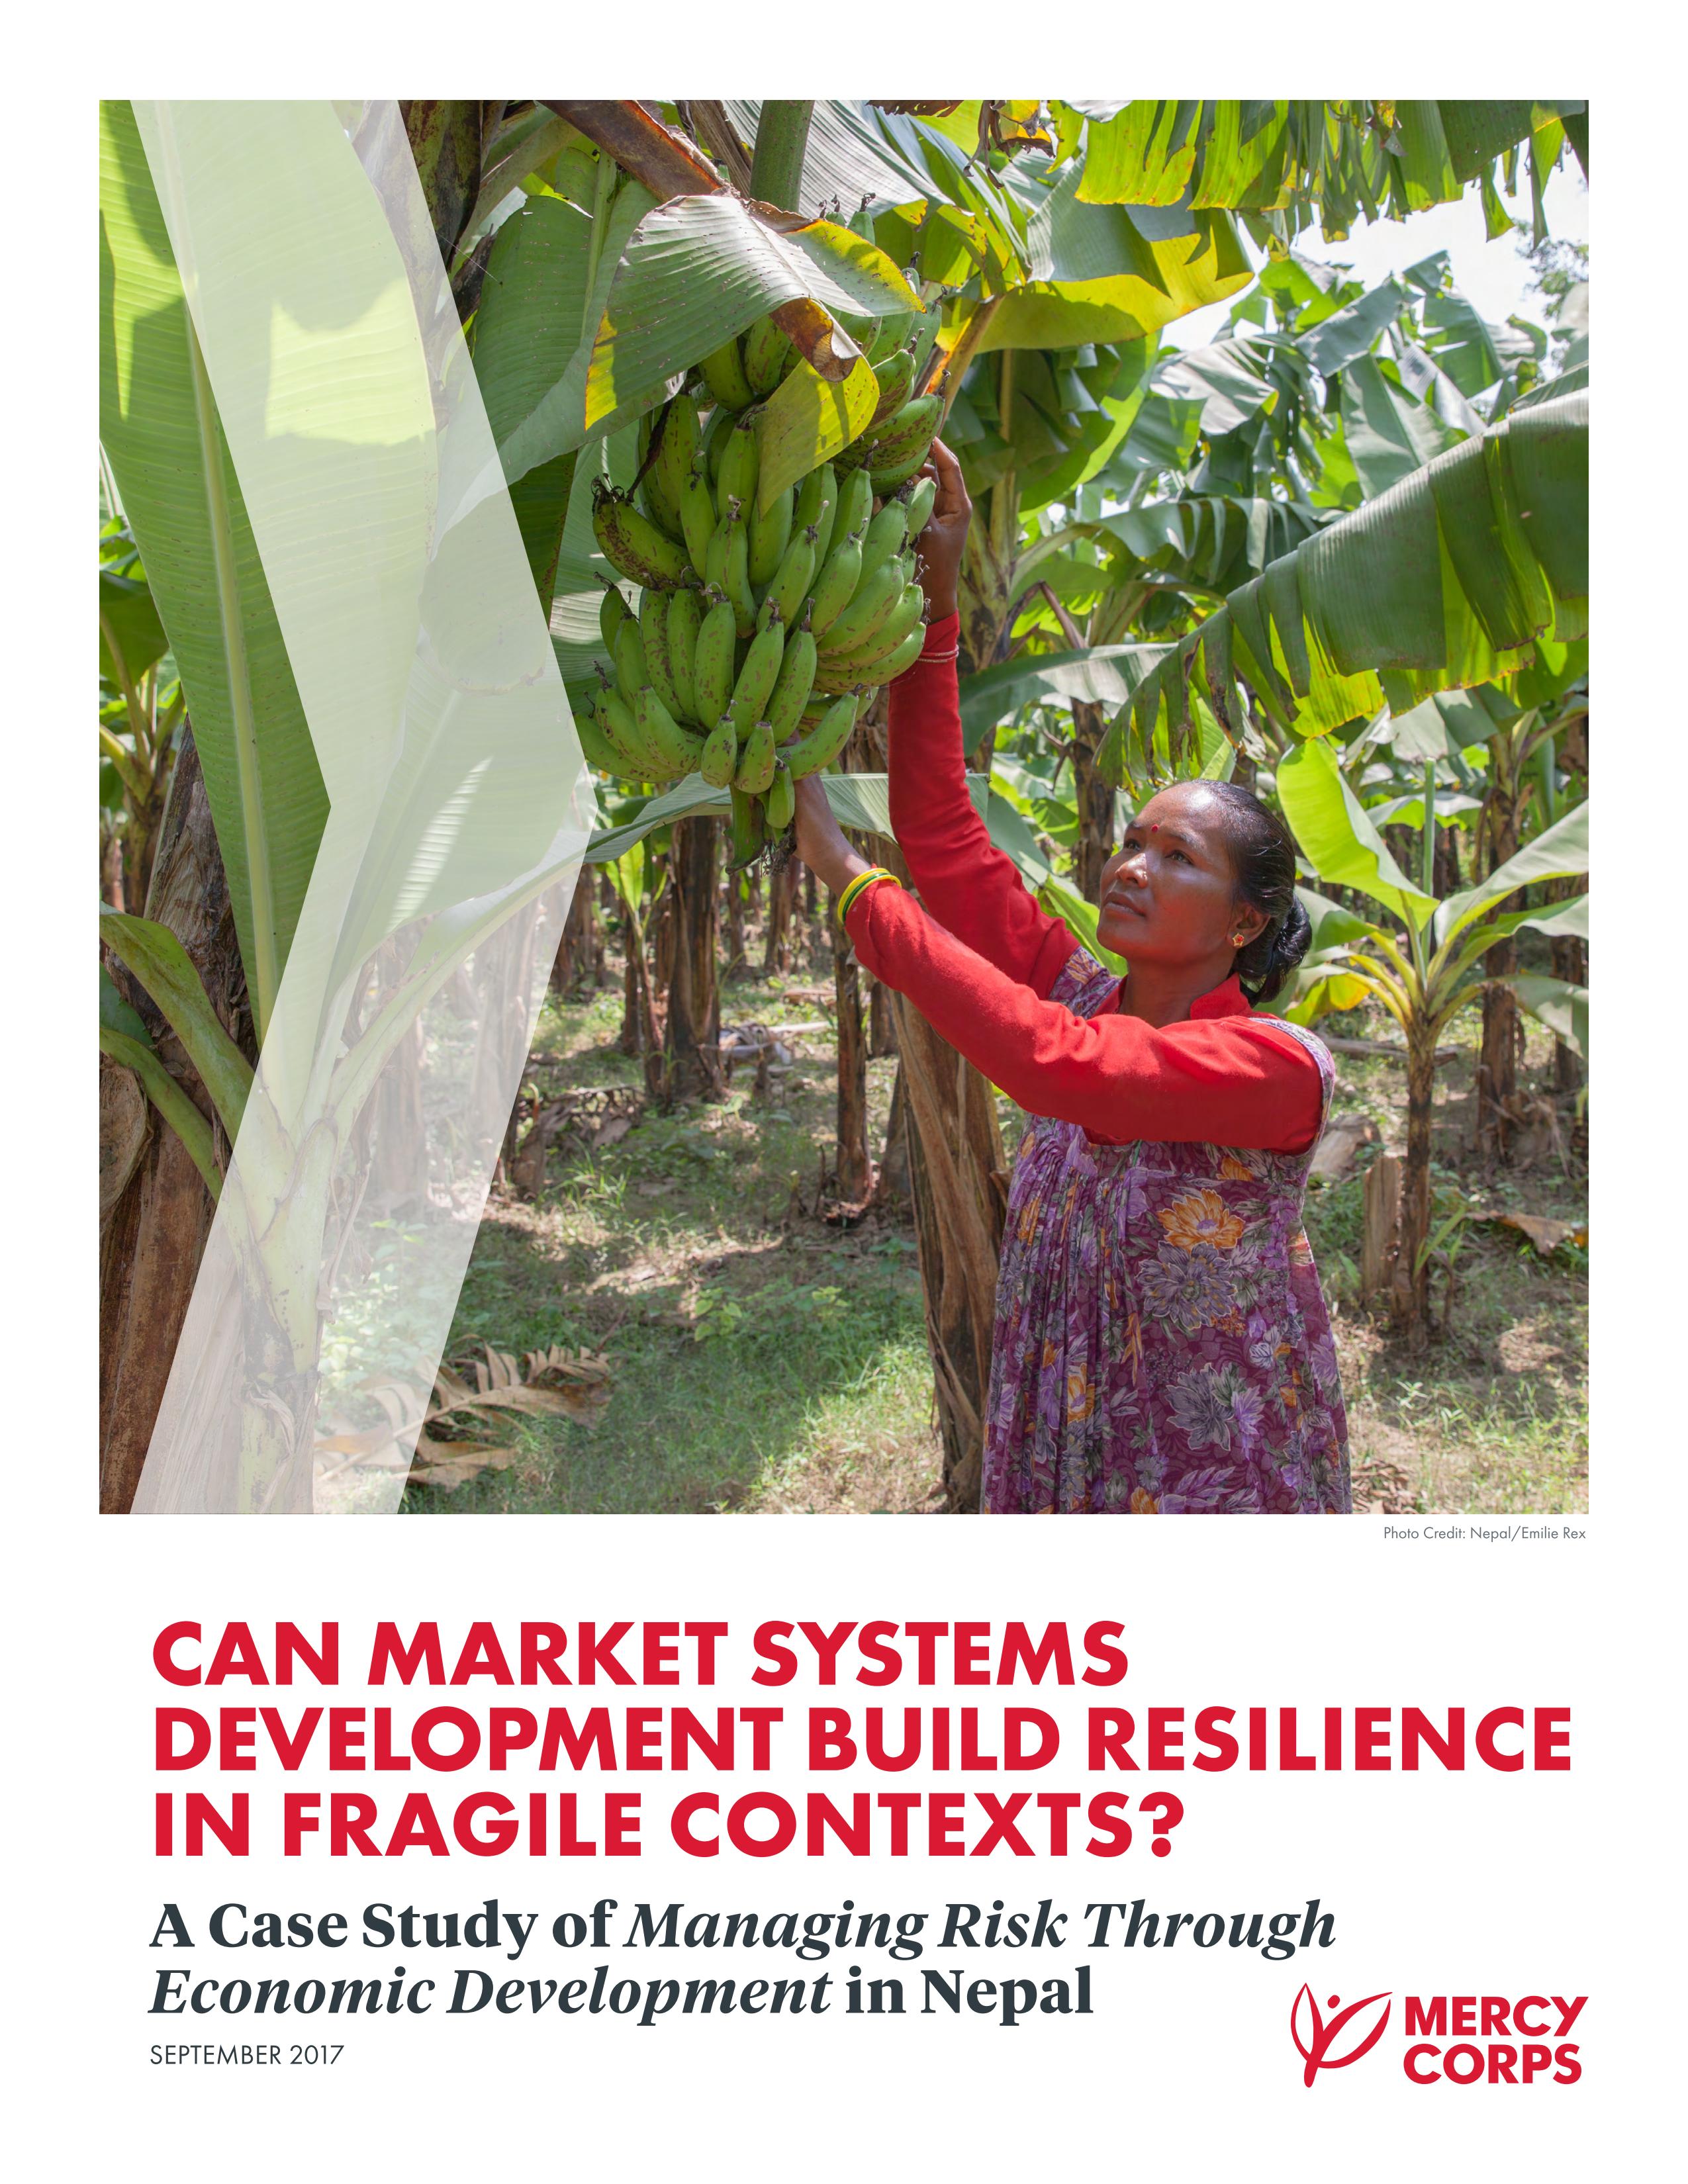 MercyCoprs Market Systems Resilience Fragile Contexts Nepal